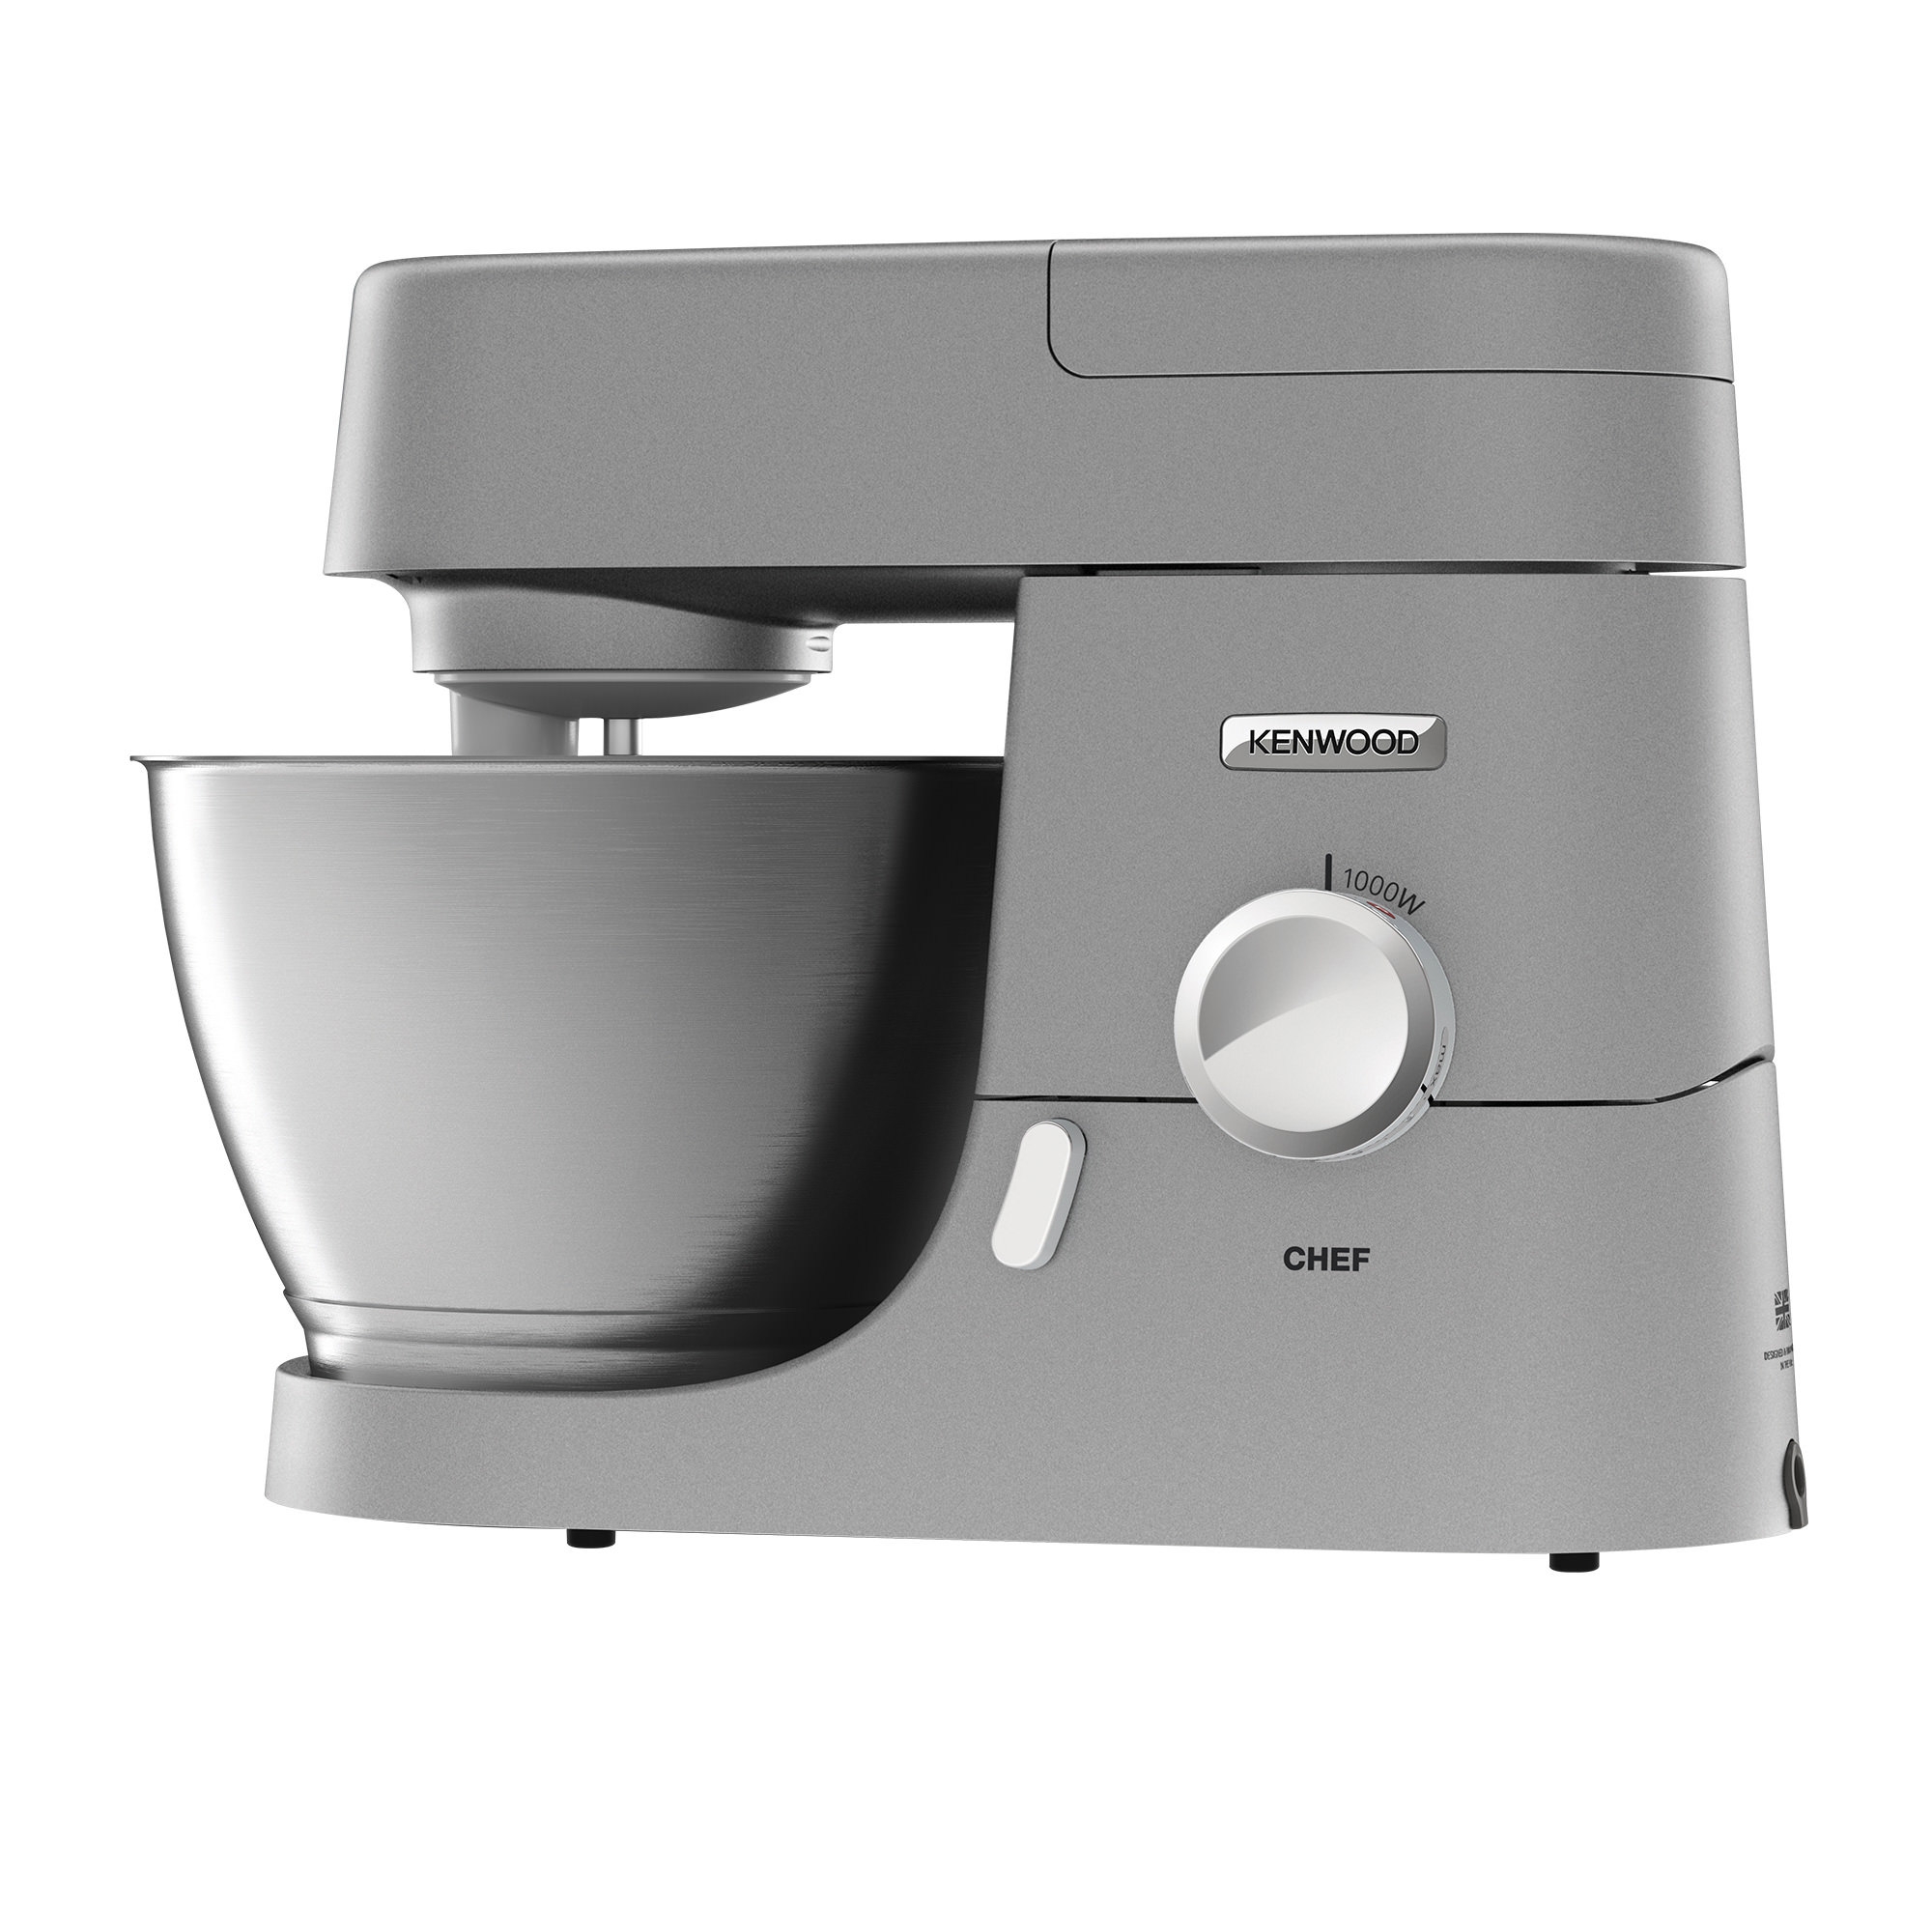 Kenwood Chef KVC3100S Stand Mixer Silver Image 1